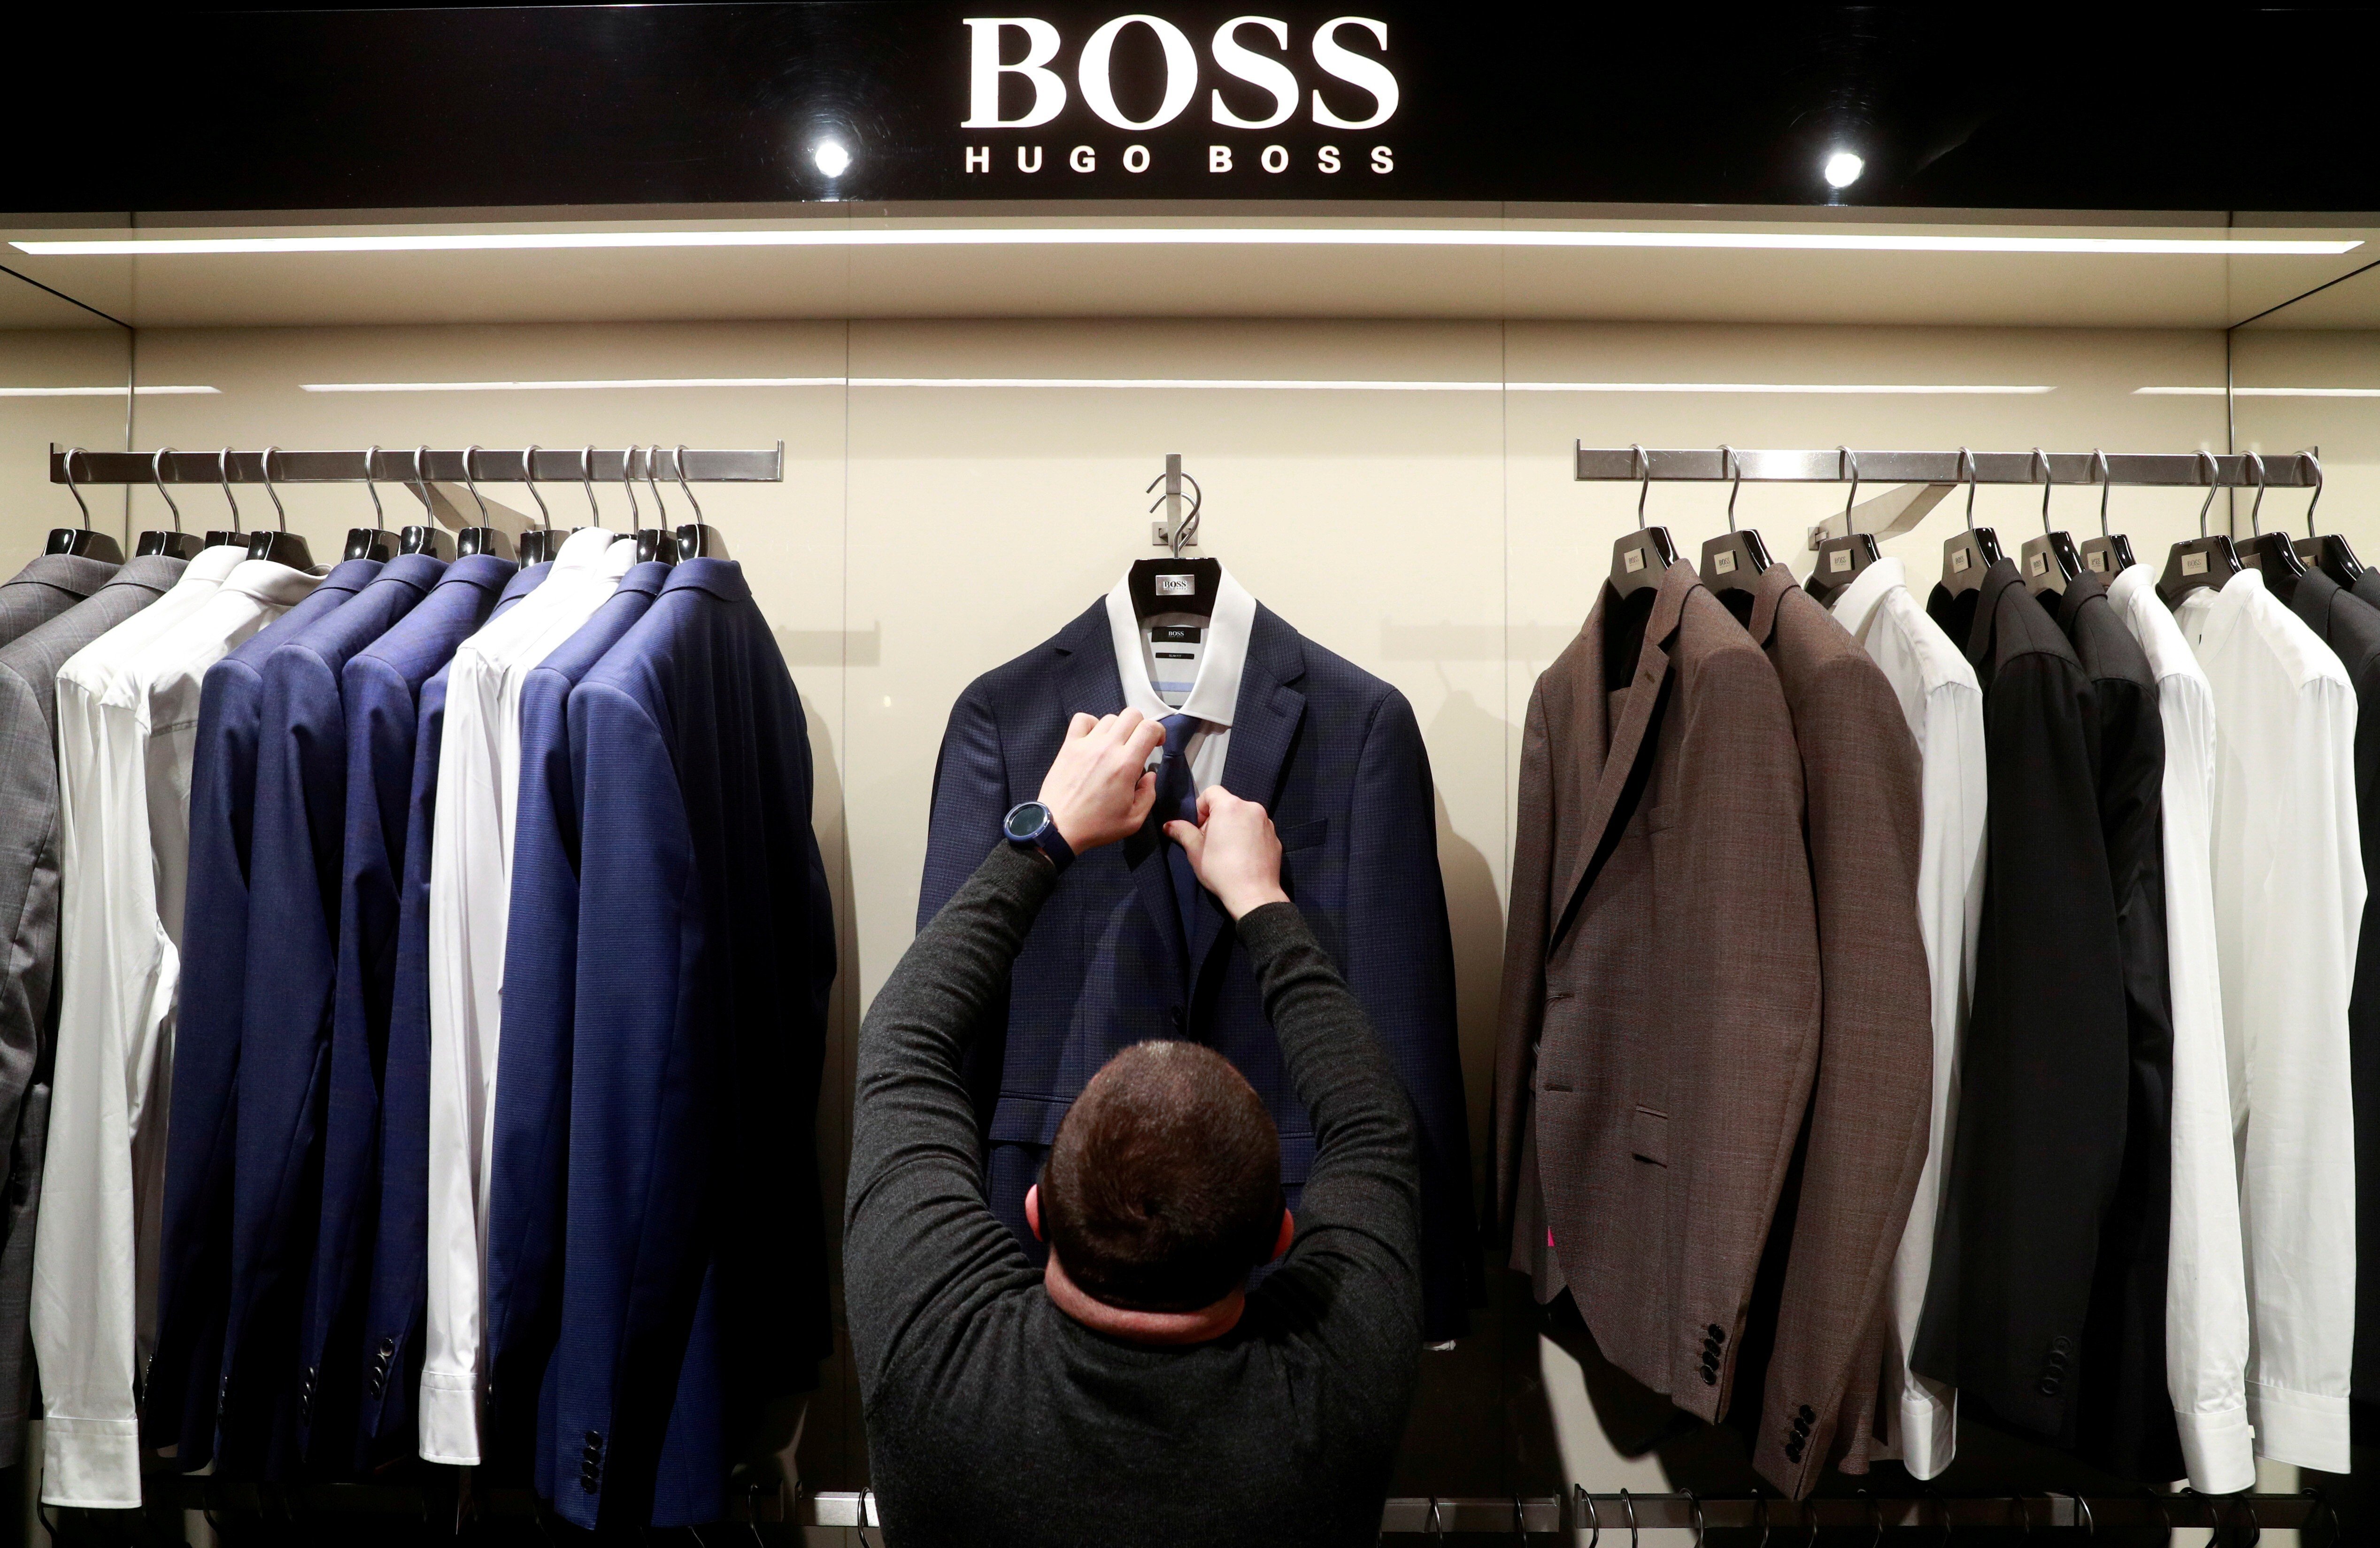 deuropening deuropening onregelmatig Xinjiang cotton: Hugo Boss' comments spark accusations of hypocrisy online  | South China Morning Post